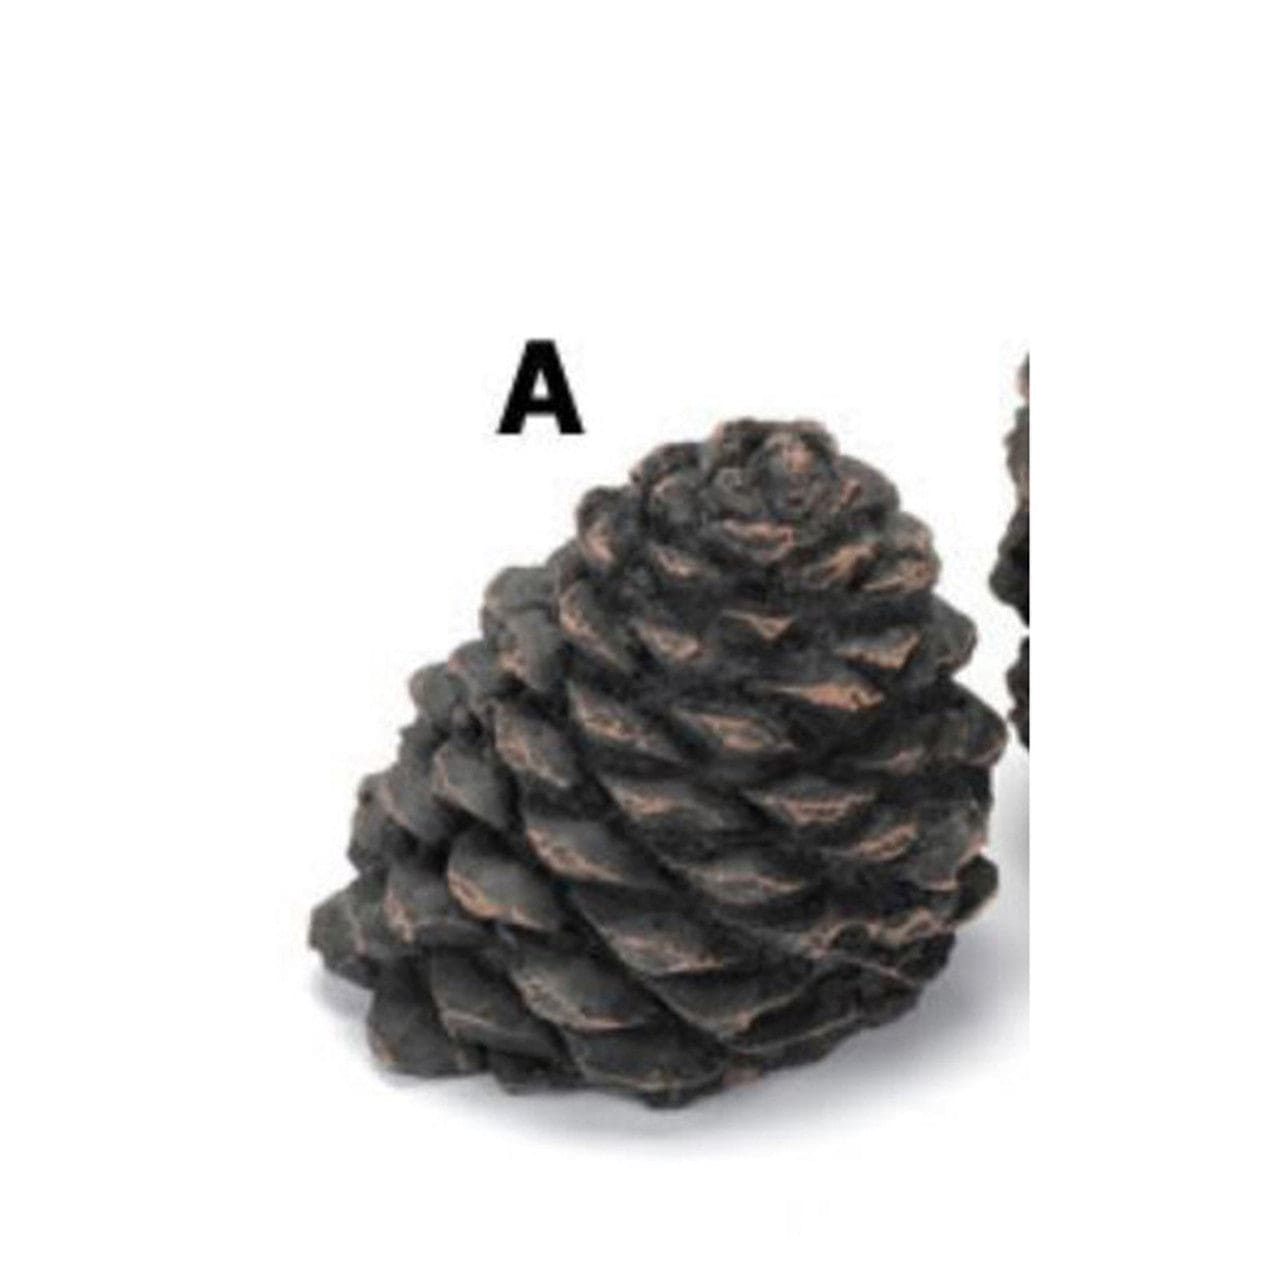 Hargrove Small Slanted Ceramic Pine Cone For Gas Logs - 1203BX - Chimney Cricket